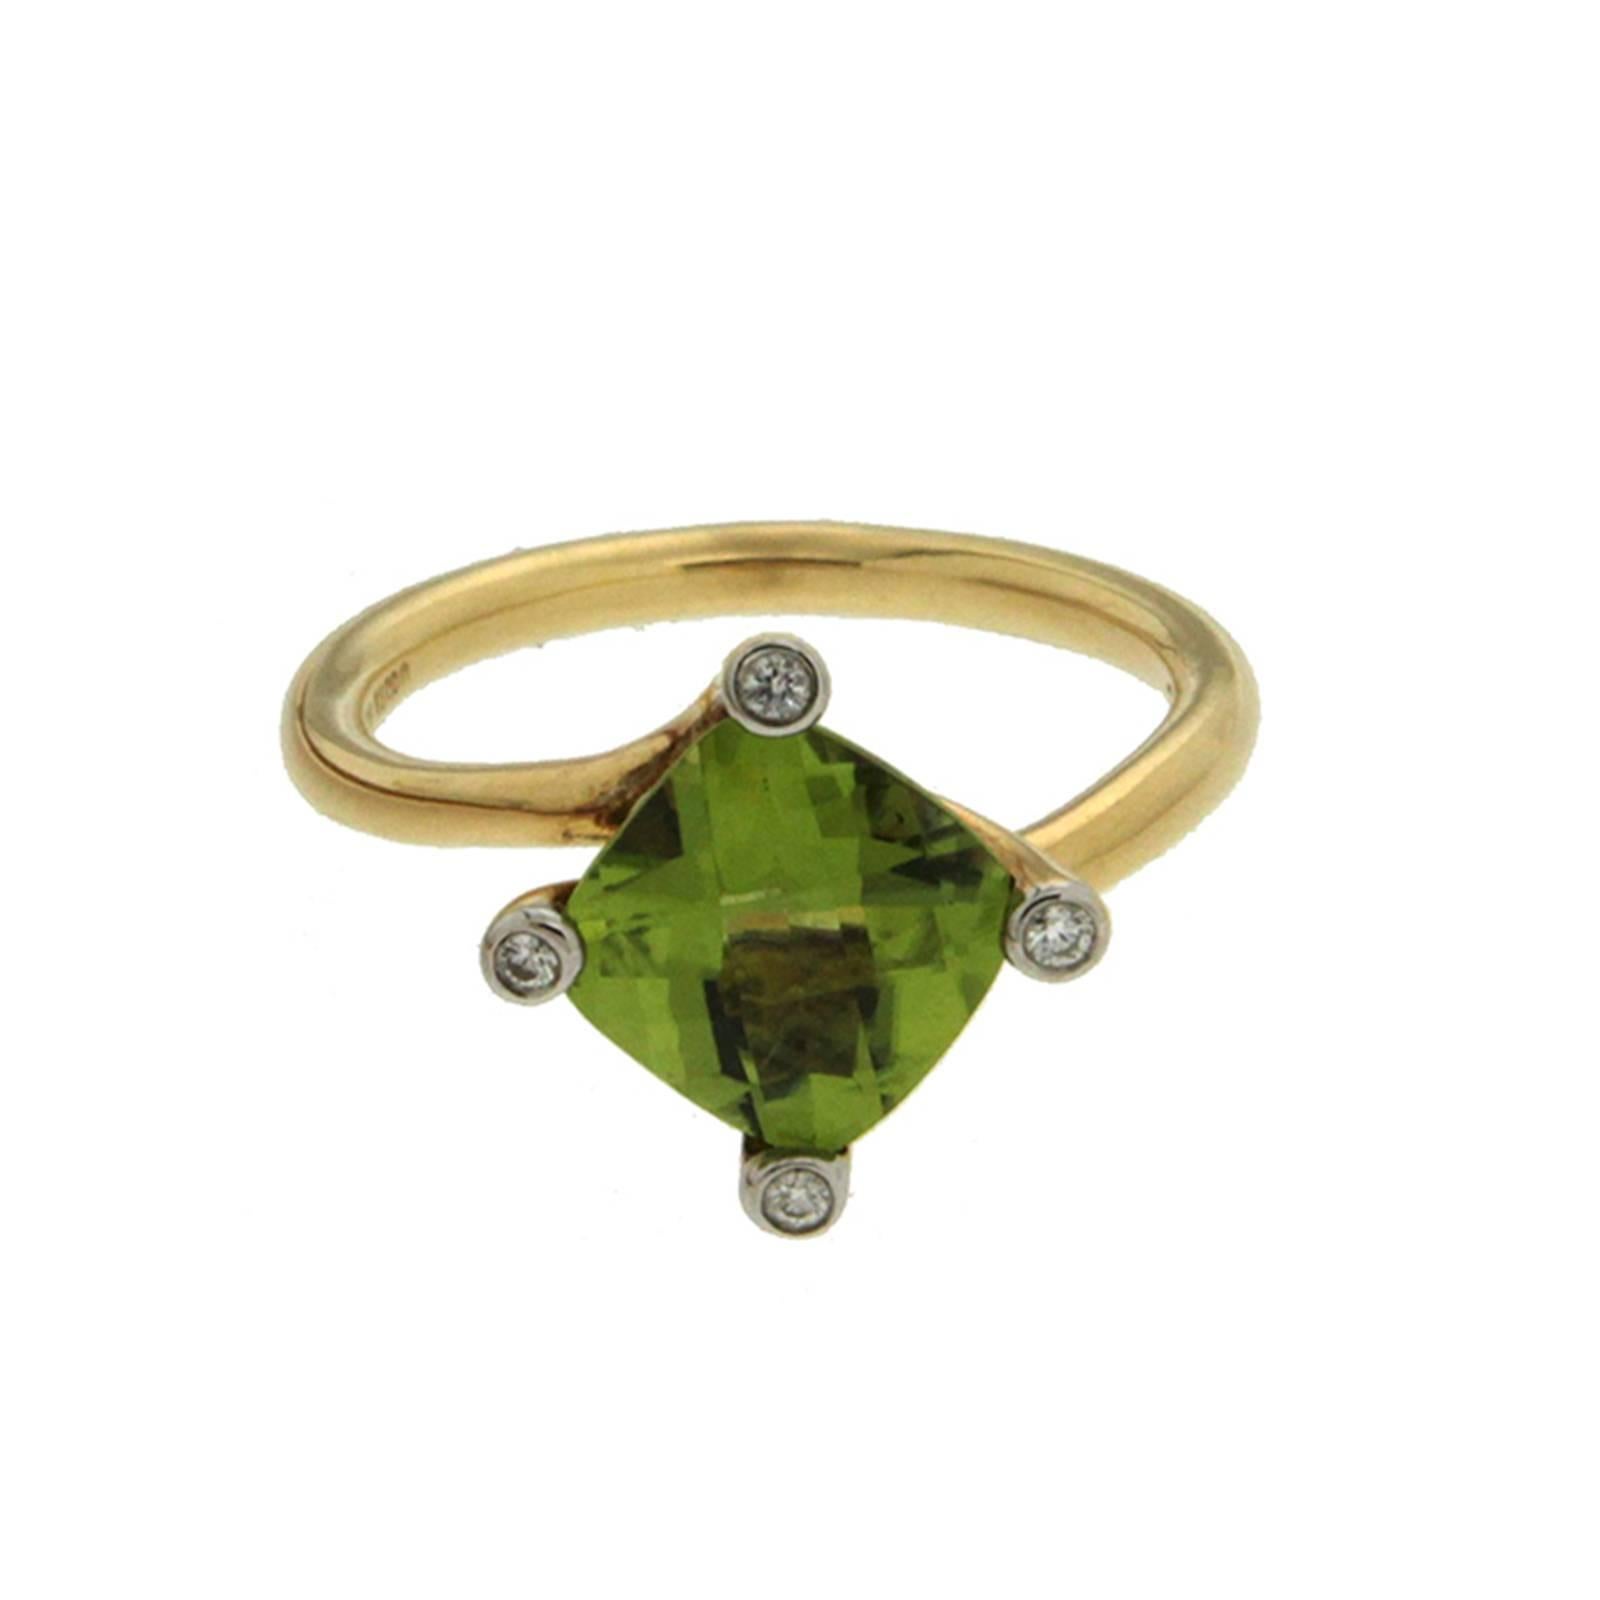 This lovely ring features a cushion 1.97ct Peridot center stone with diamonds in four prongs. The ring is completed in 18kt yellow gold with twist shanks.